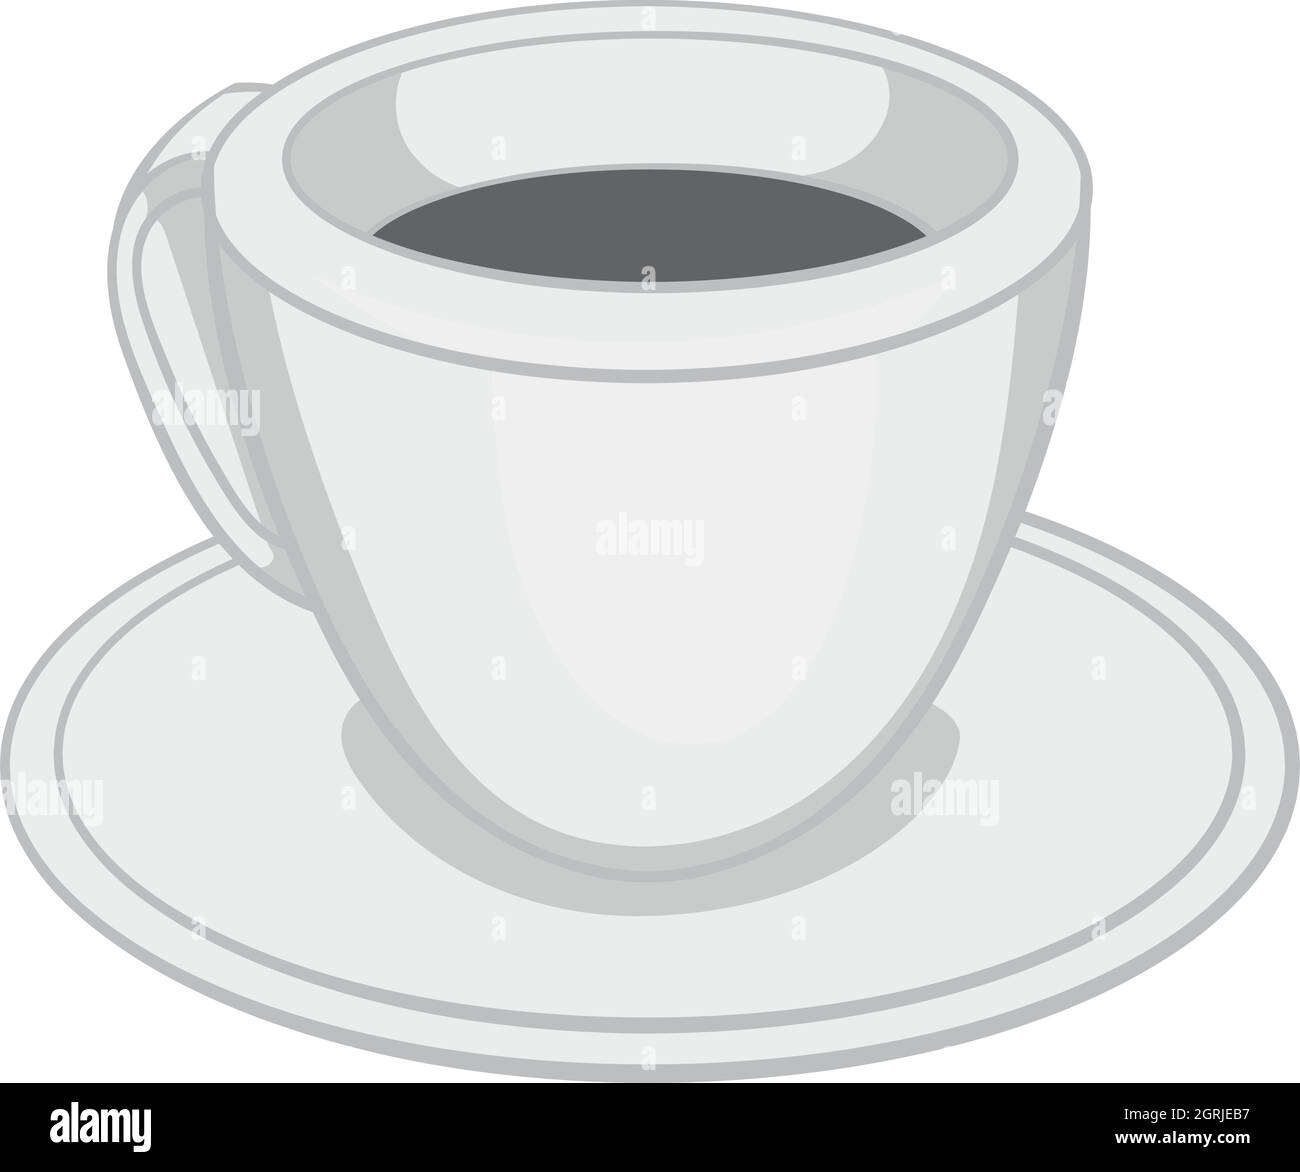 Cup of tea or coffee icon, black monochrome style Stock Vector